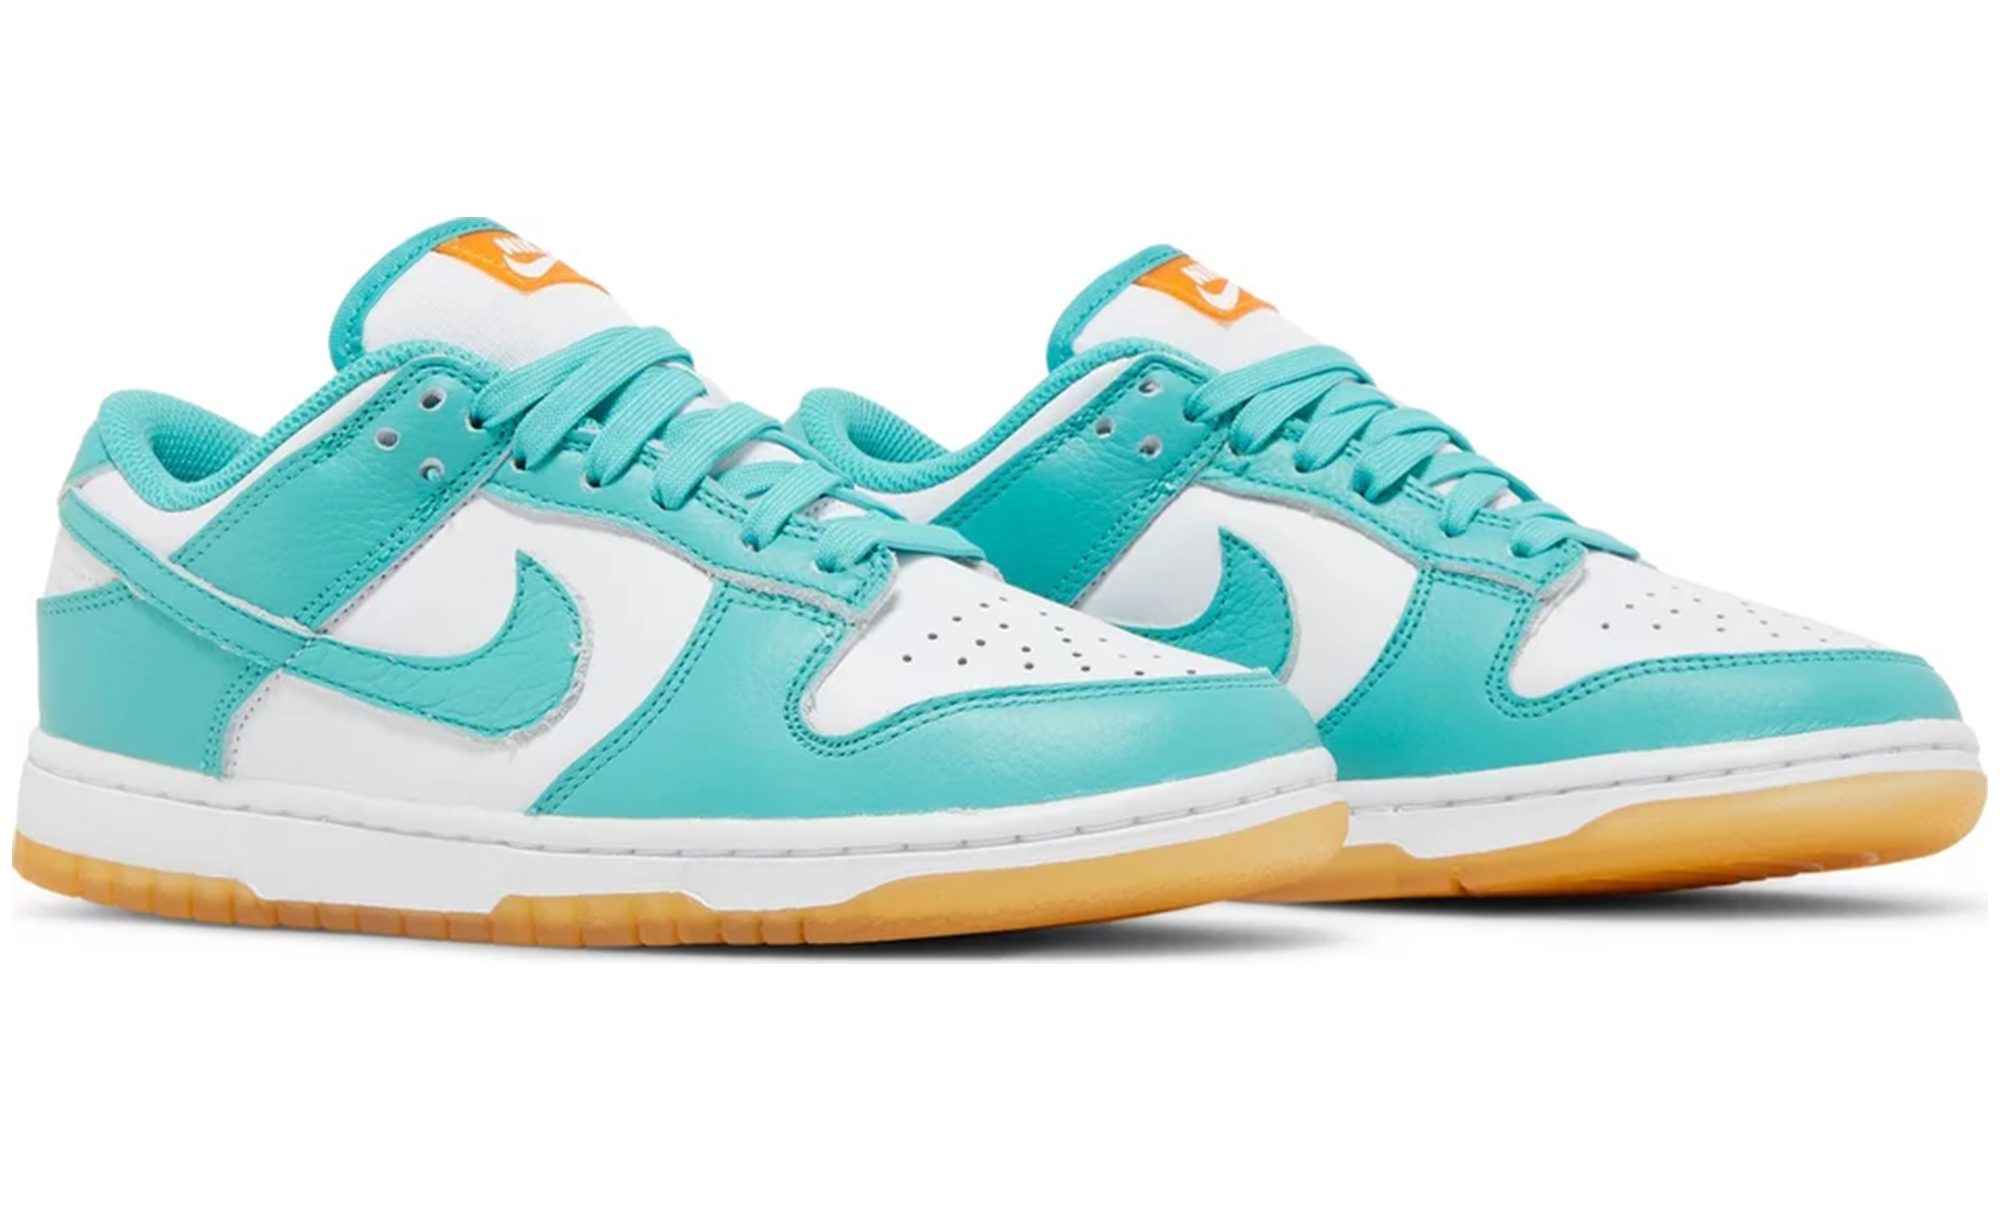 teal dunks | Dunk Low Turquoise Teal Miami Dolphins